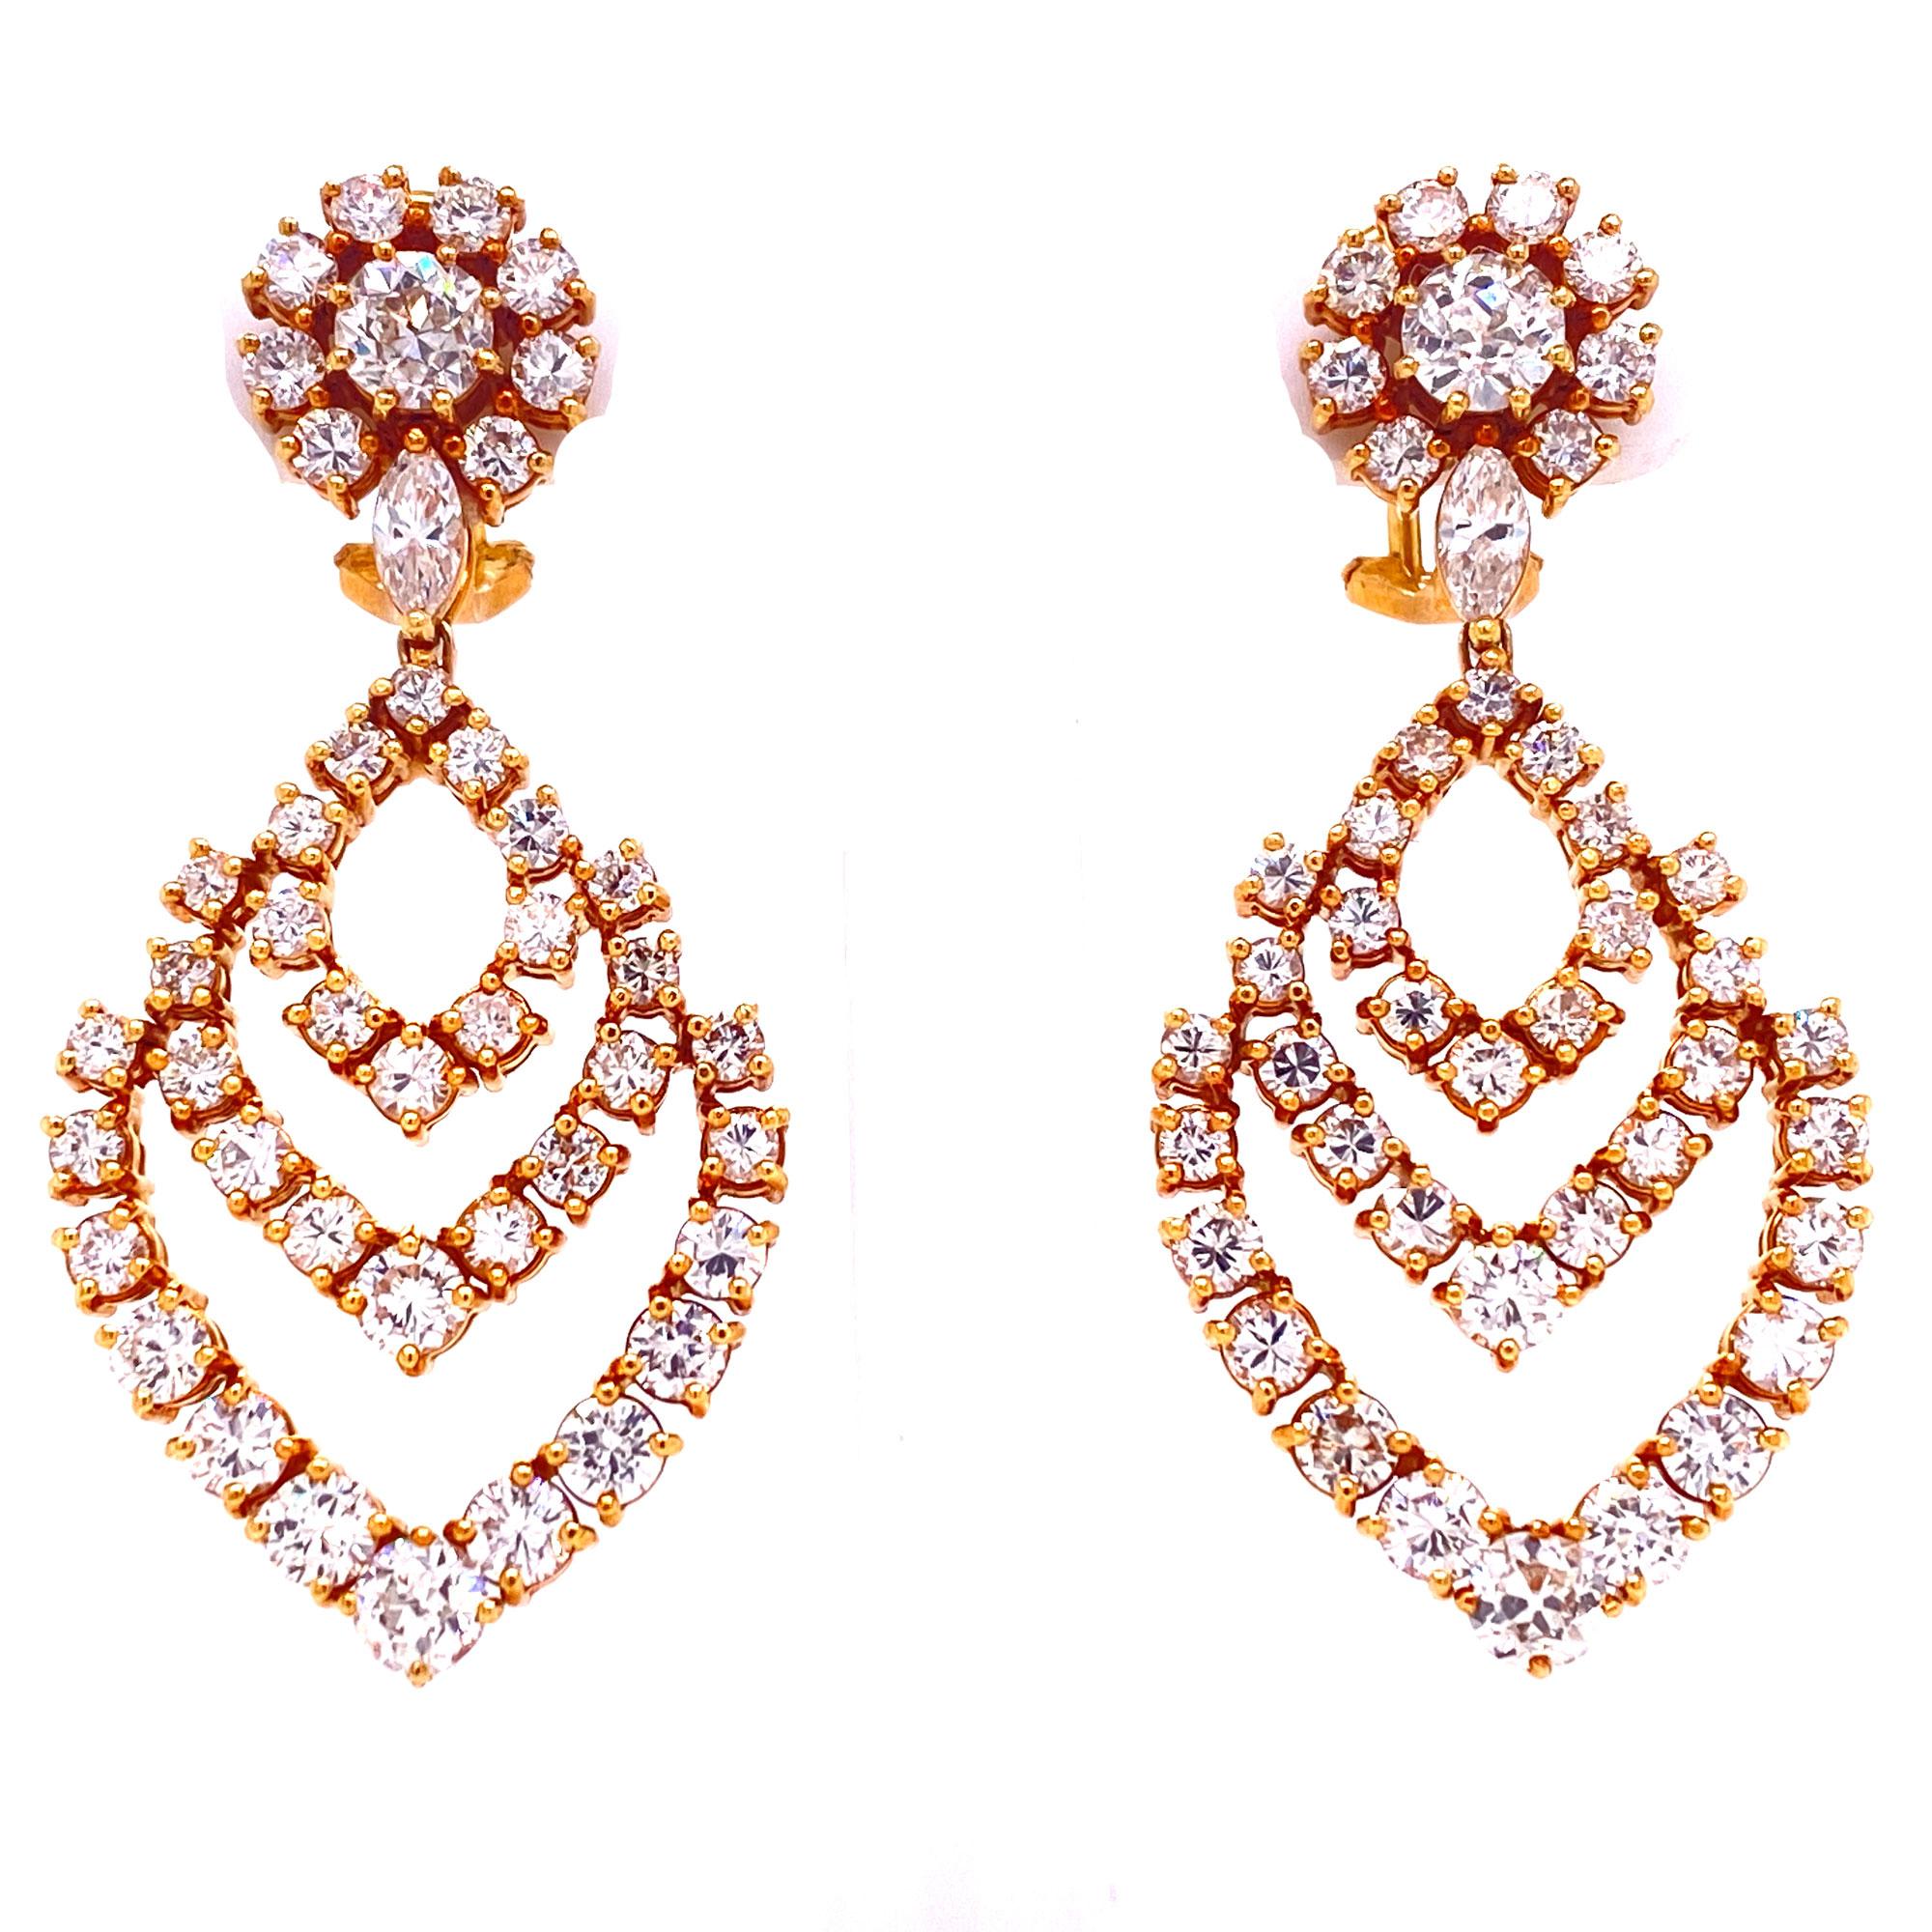 Stunning diamond drop earrings fashioned in 18 karat yellow gold. The earrings feature 88 round brilliant cut diamonds weighing approximately 9.00 carat total weight. The diamonds are graded F-G color and VS2-SI1 clarity. The earrings measure 2.0